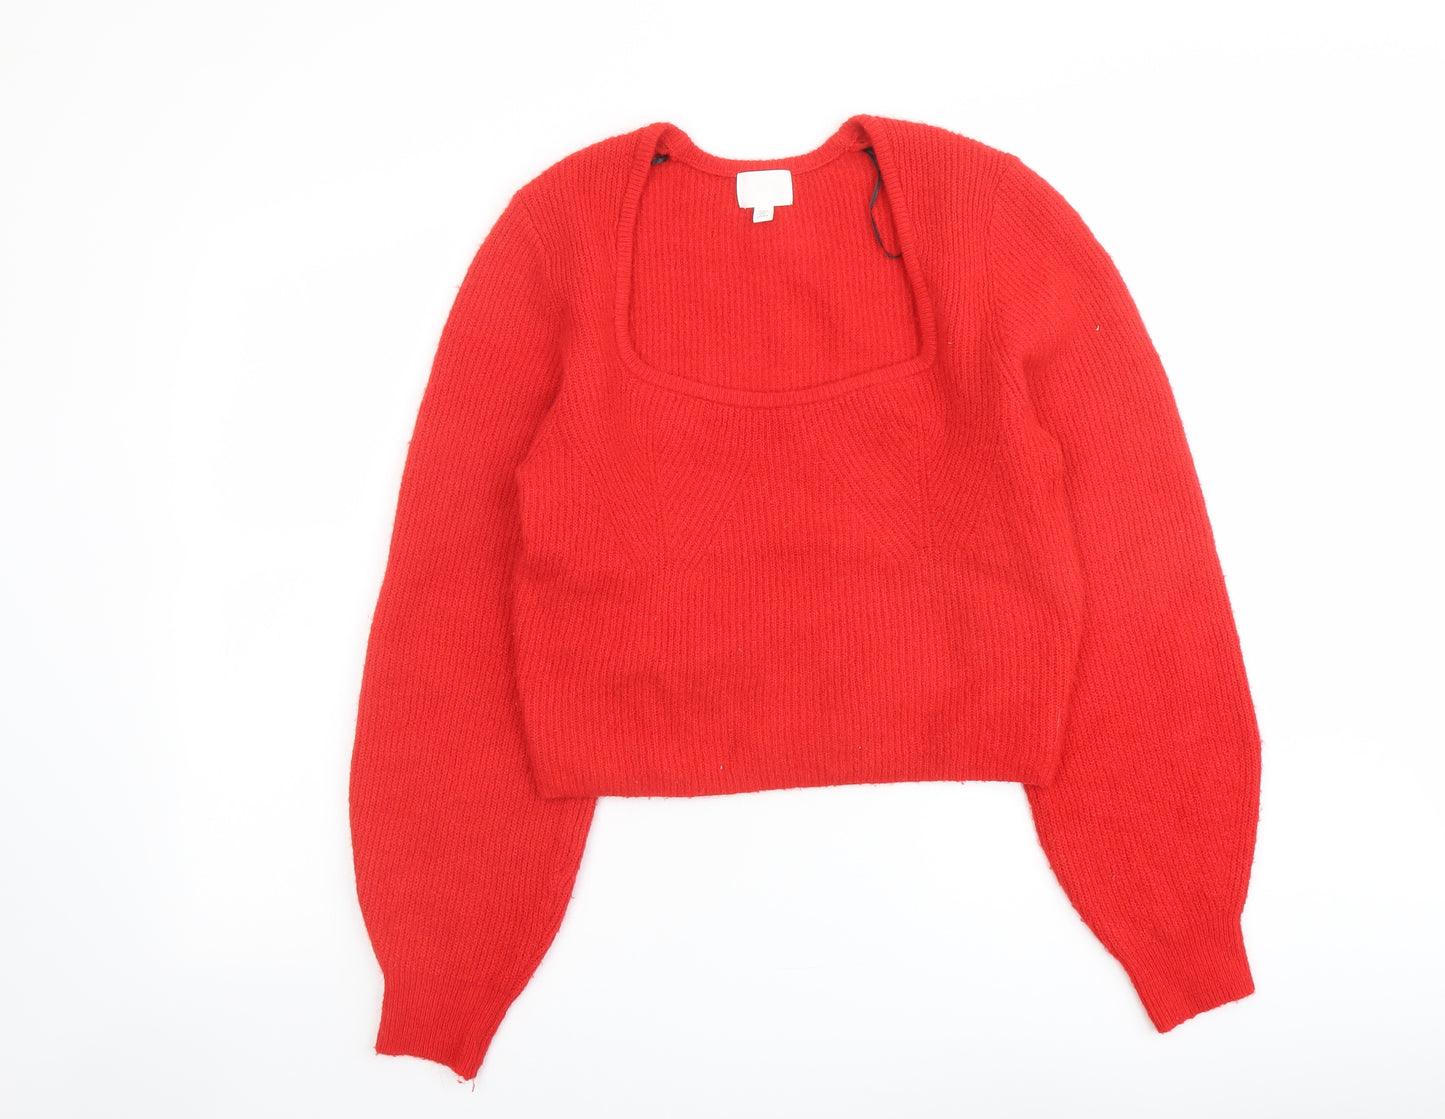 H&M Womens Red Square Neck Polyester Pullover Jumper Size M - Cropped Ribbed